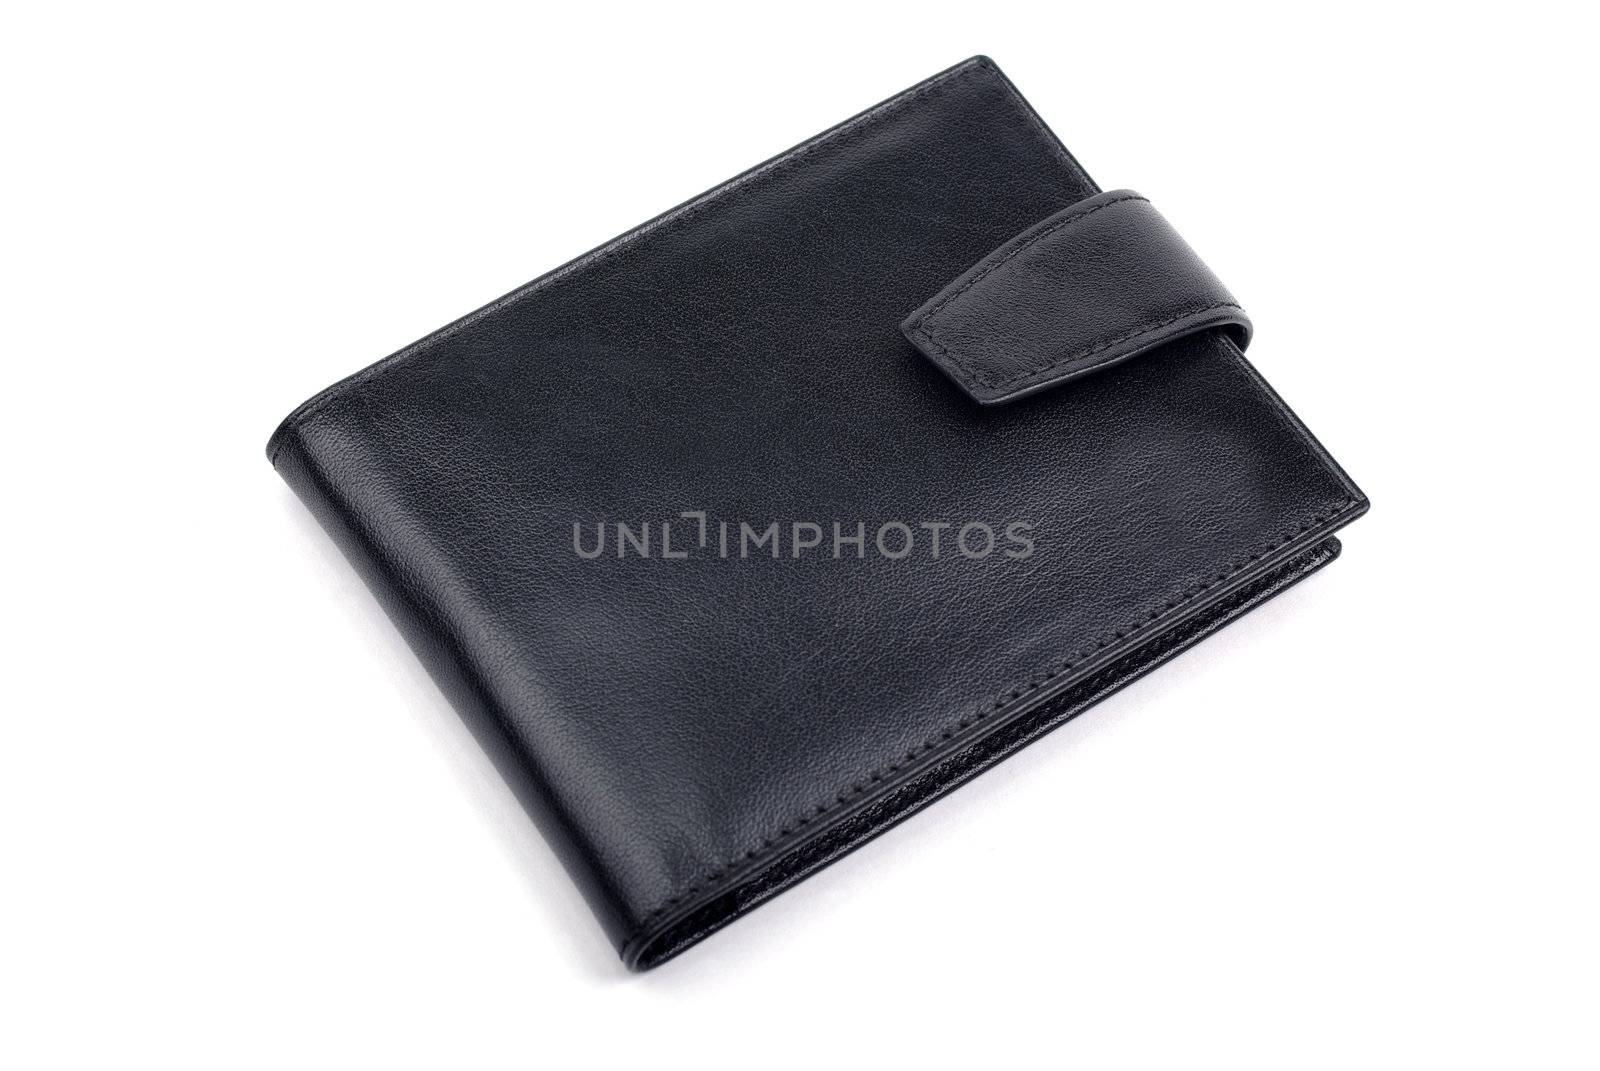 Closed black leather business card holder isolated on white background